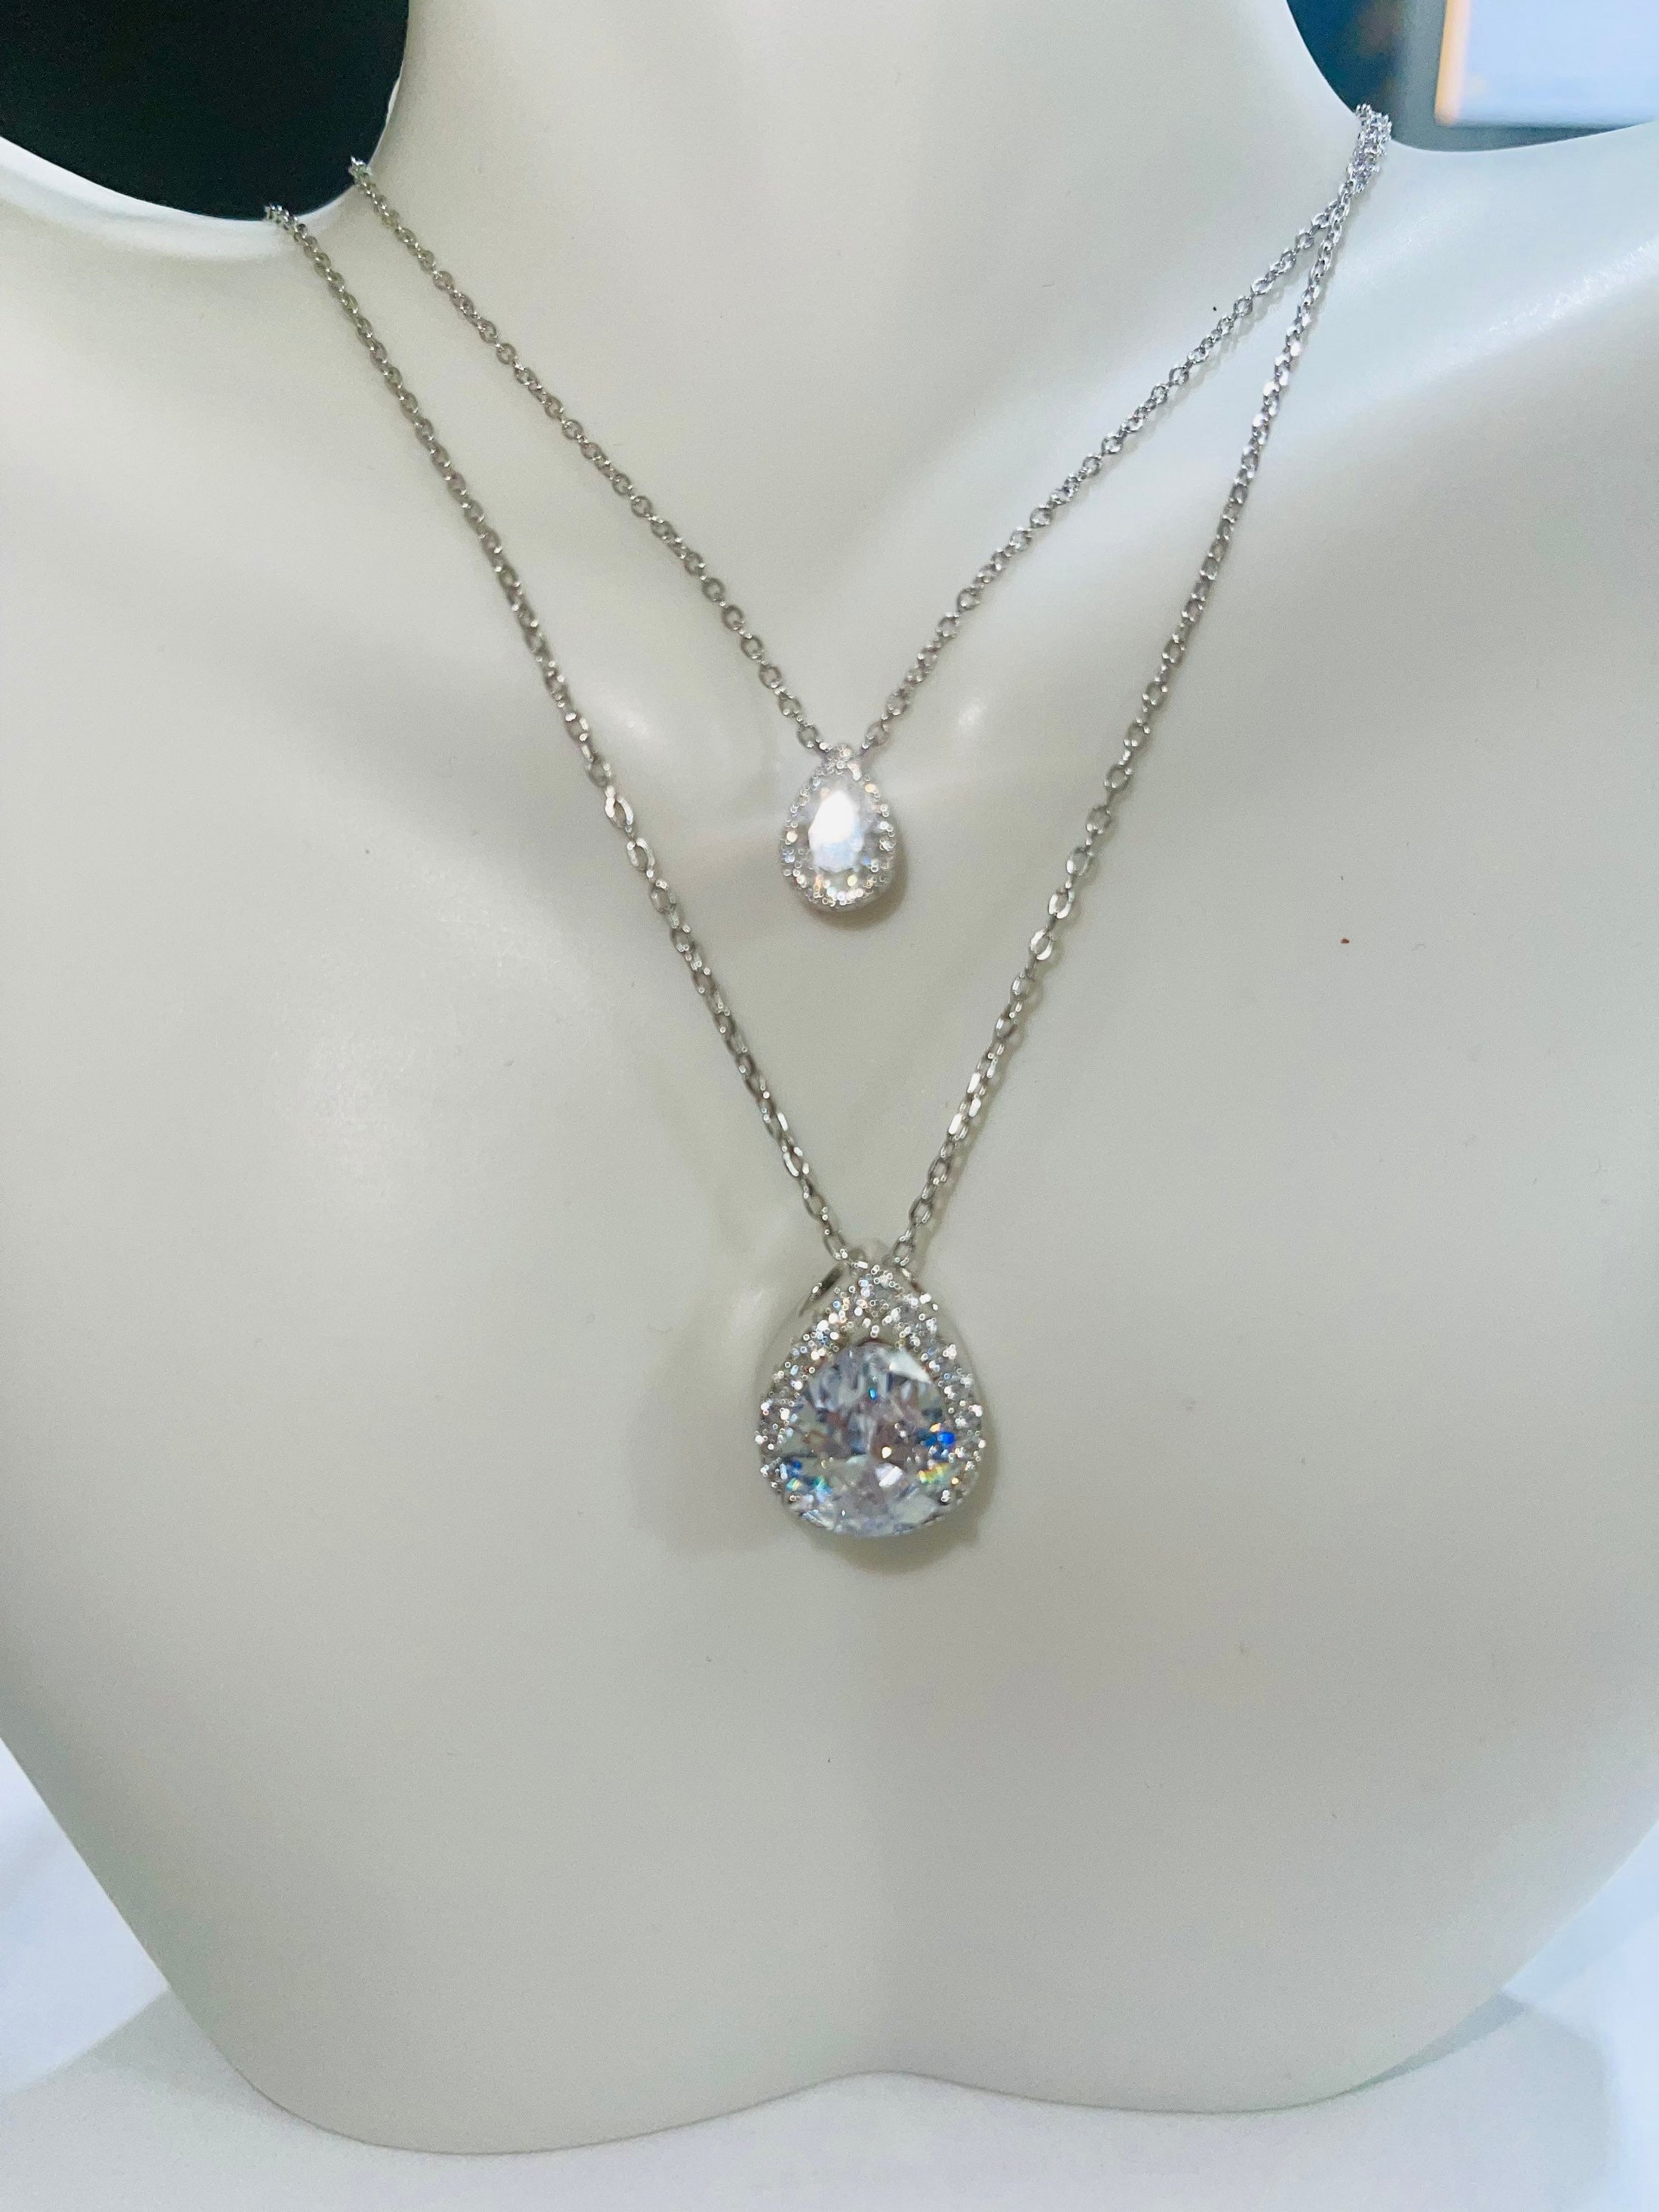 Exquisite 14k White Gold Vermeil Urn Necklace with Genuine Crystals - Perfect Cremation Jewelry for Ashes